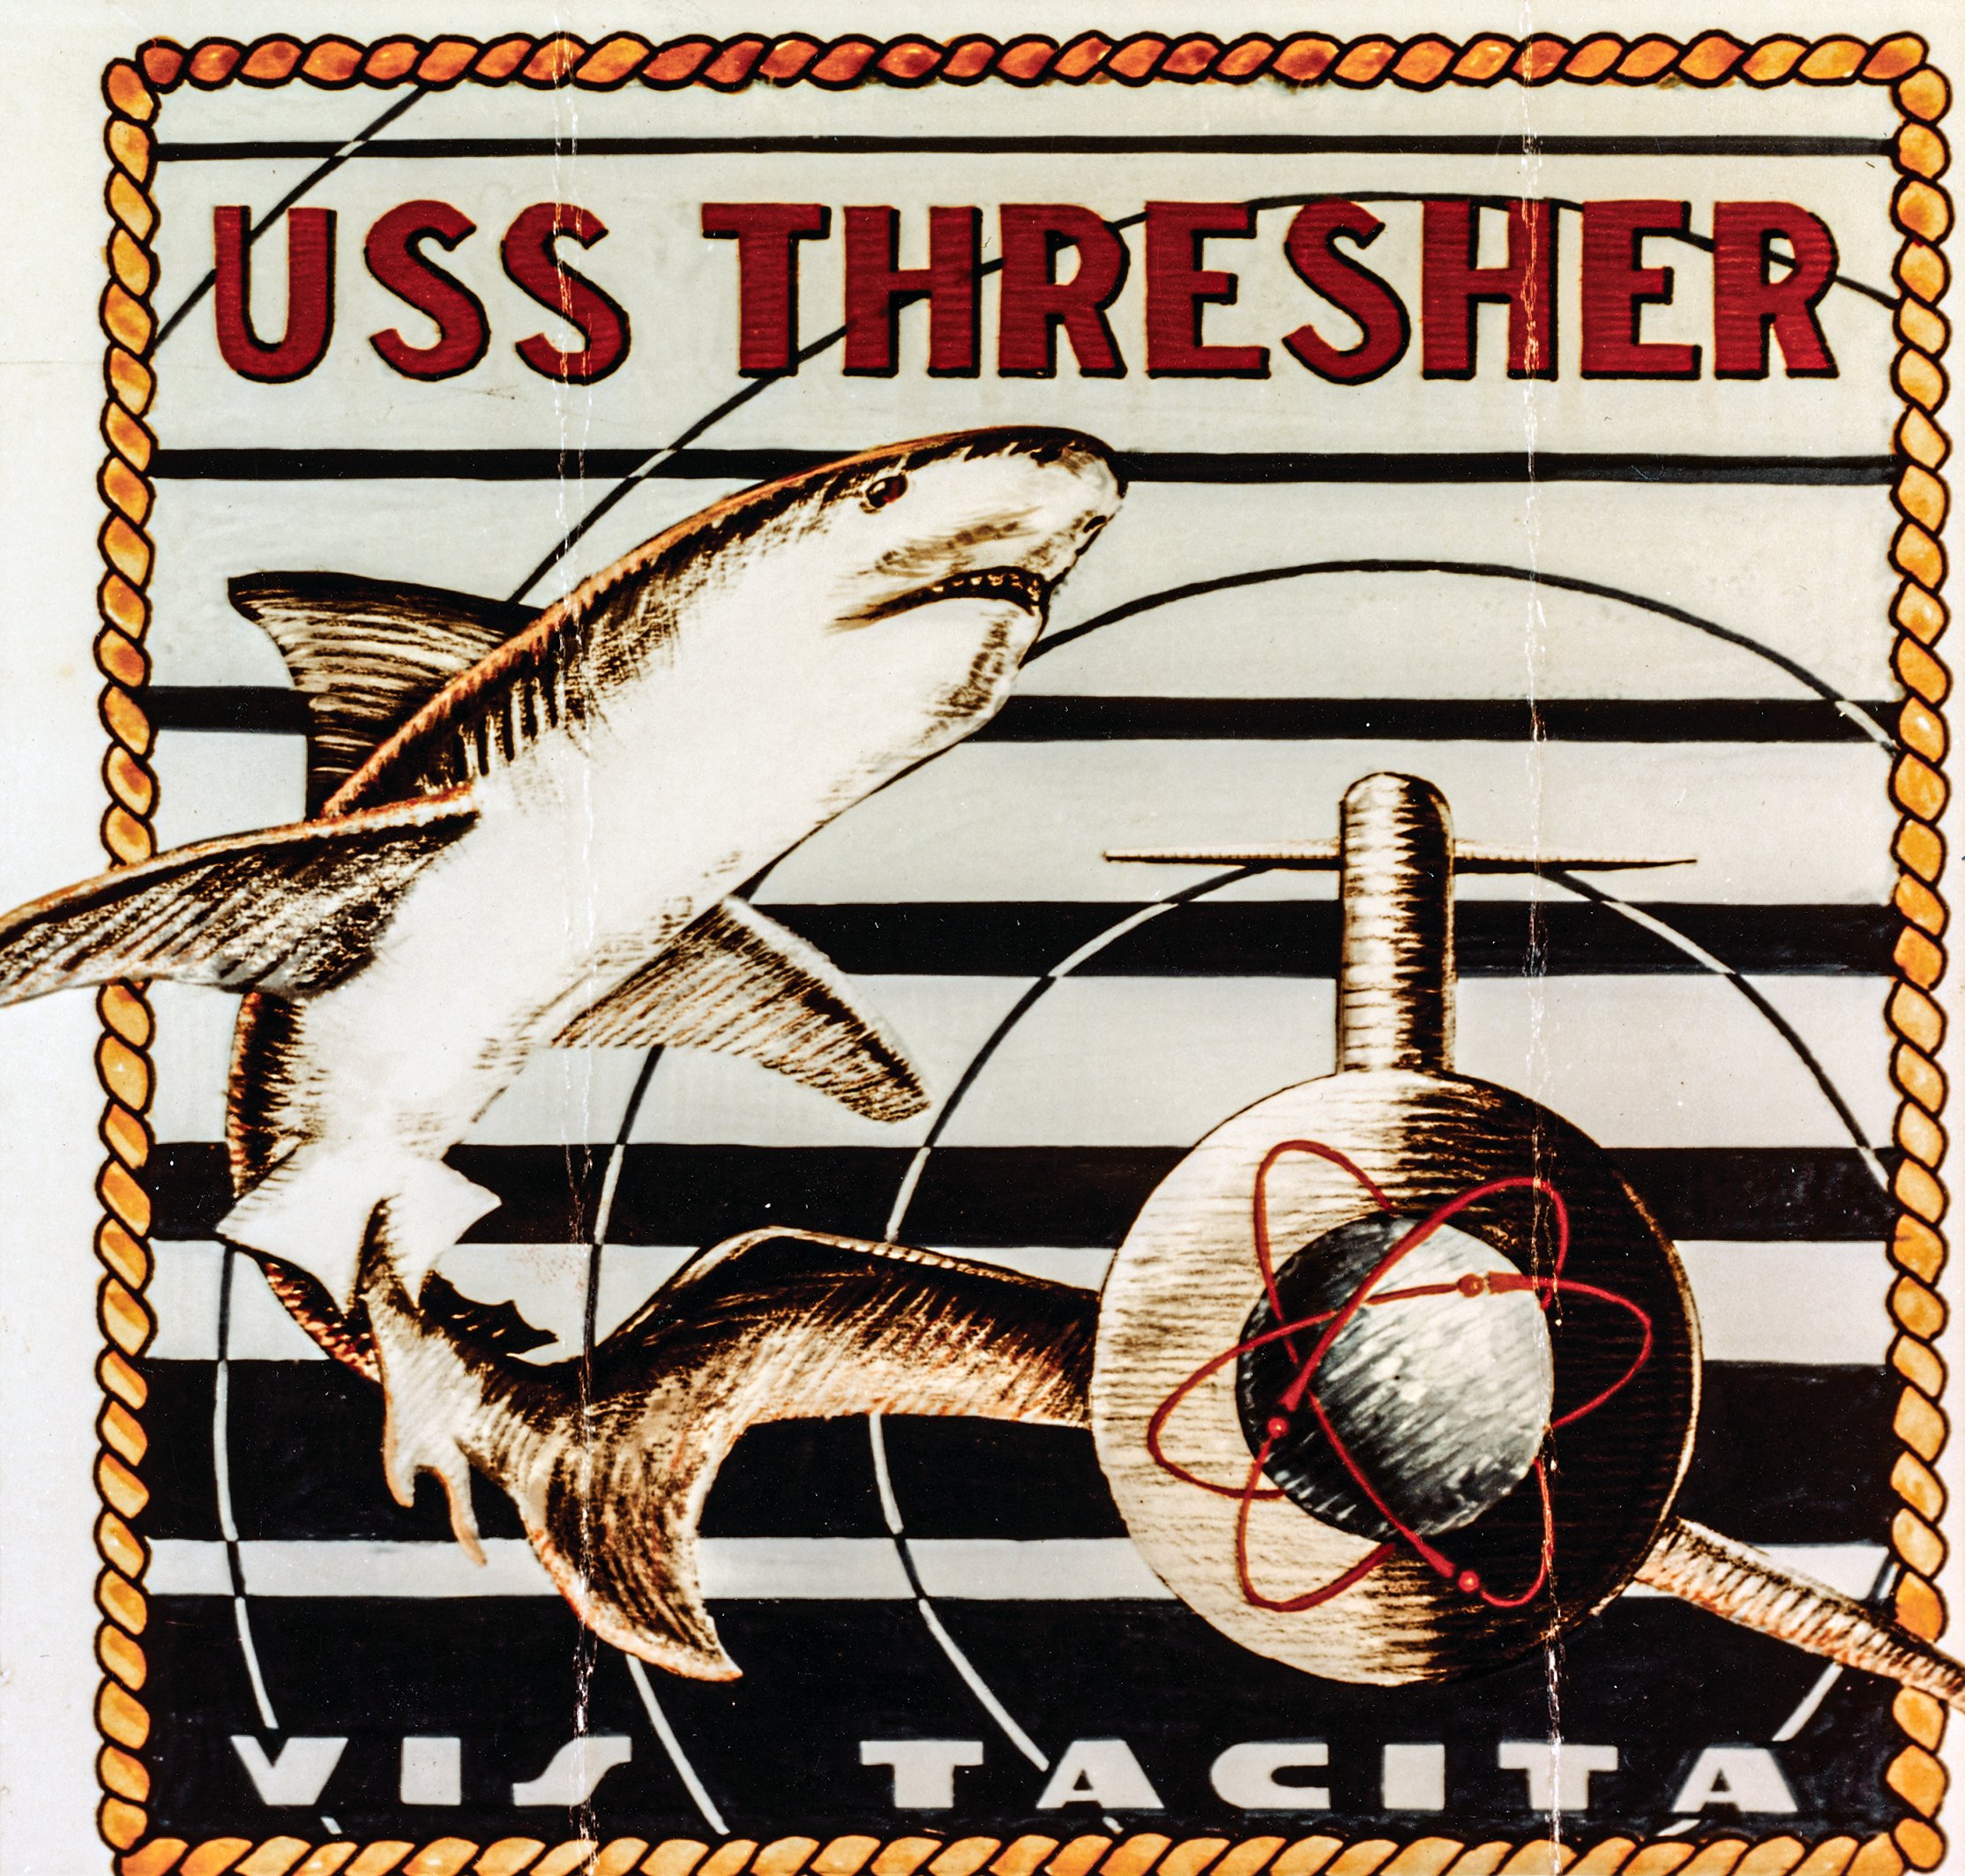 Insignia and motto of the USS Thresher (SSN-593)